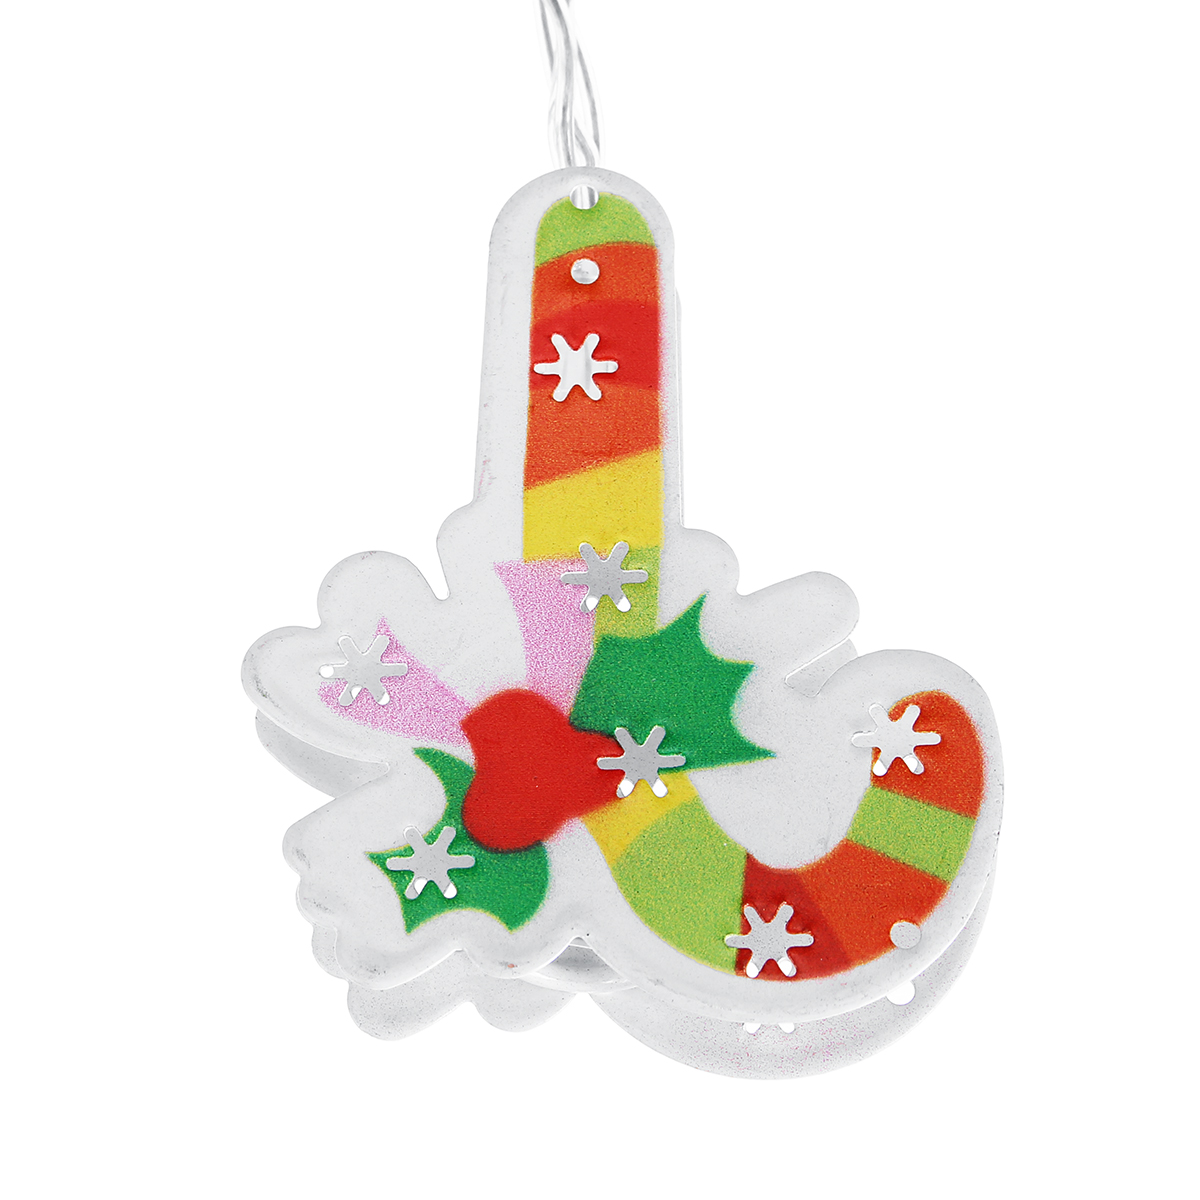 2M-3M-Christmas-SocksCrutches-Battery-Powered-LED-Decorative-Tree-String-Light-for-Festival-Party-1557807-3